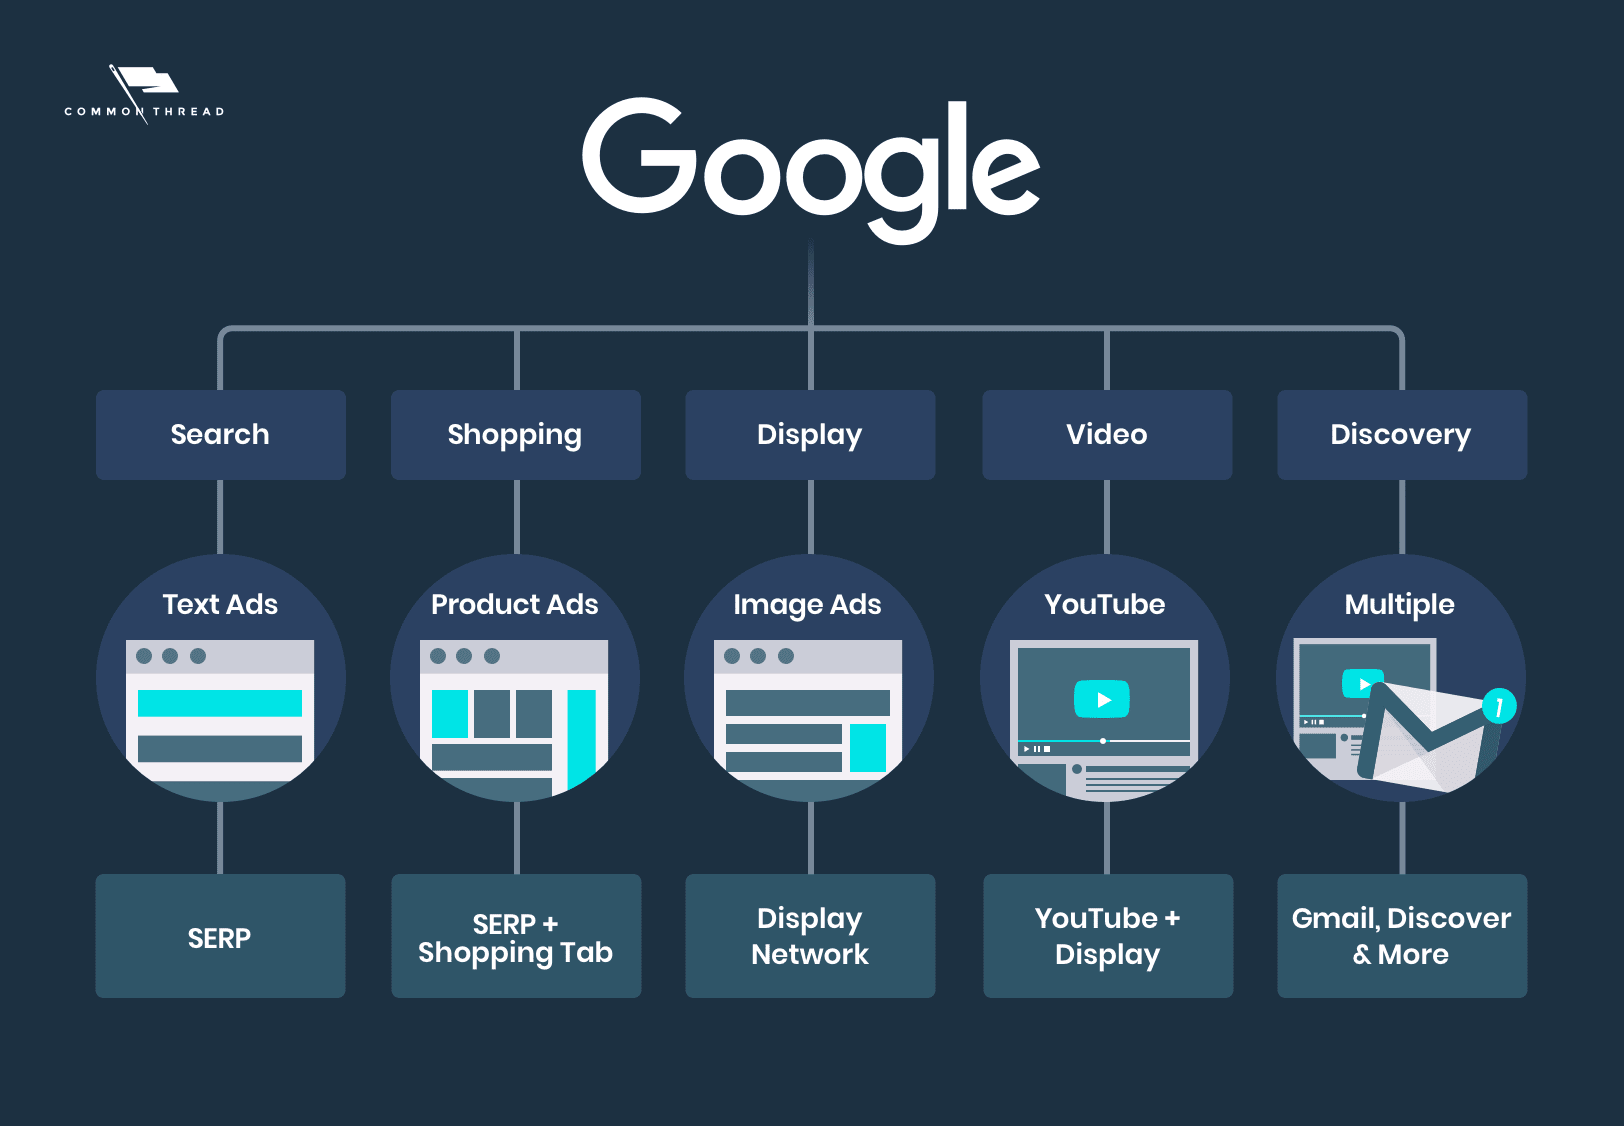 Overview of Campaign Types for Google Ads